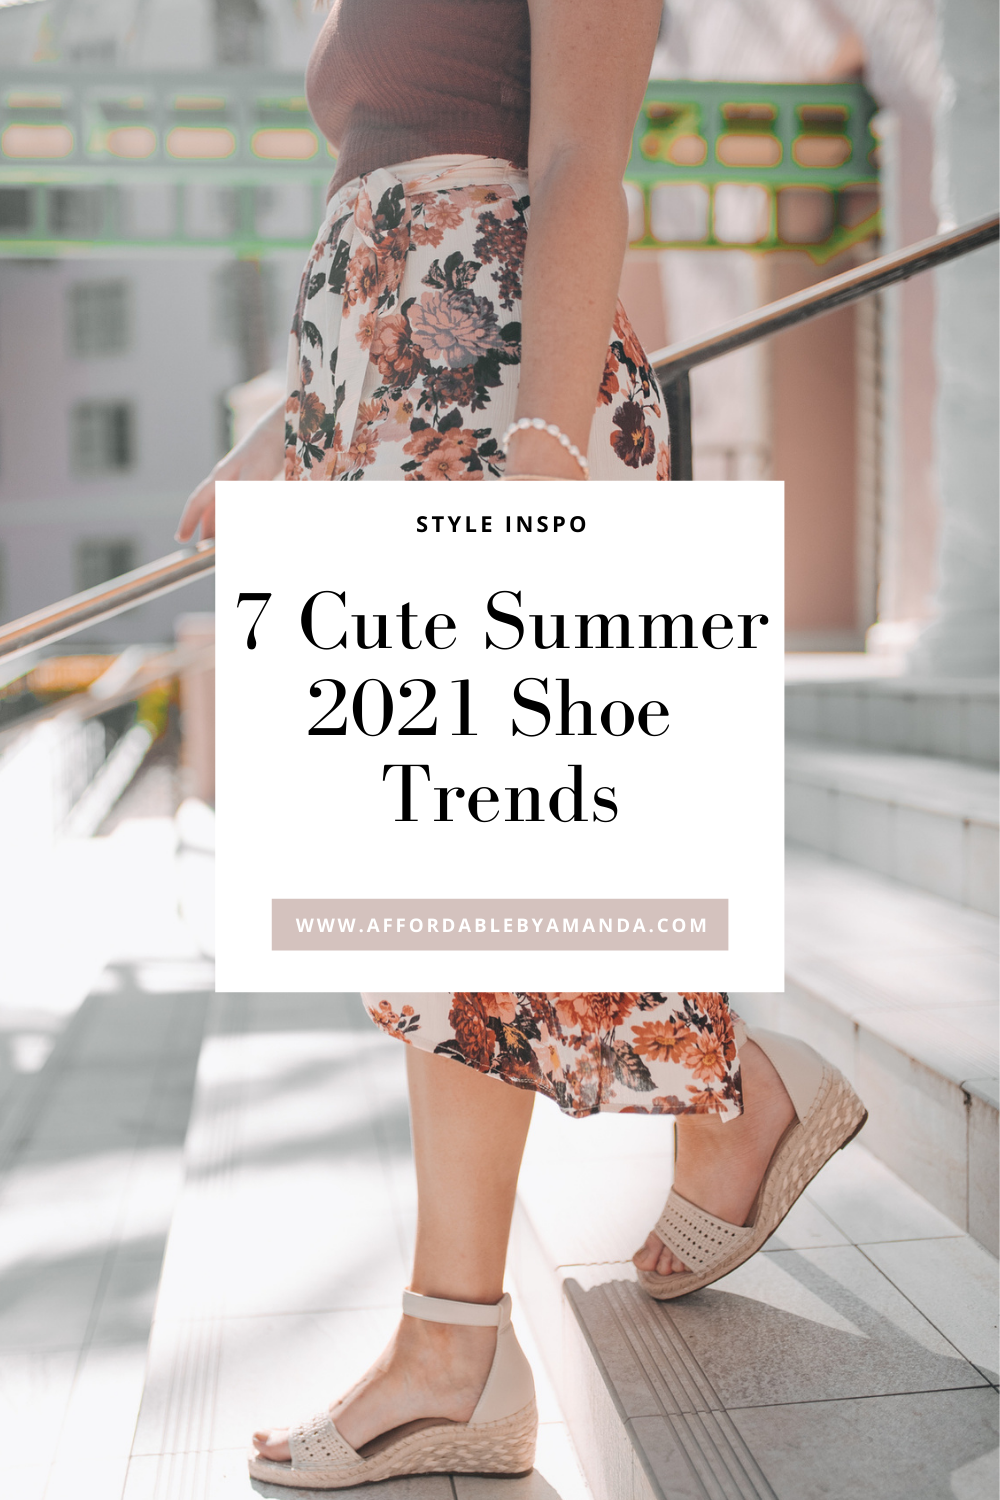 7 Cute Summer 2021 Shoe Trends - Affordable by Amanda, Top US Style Blog